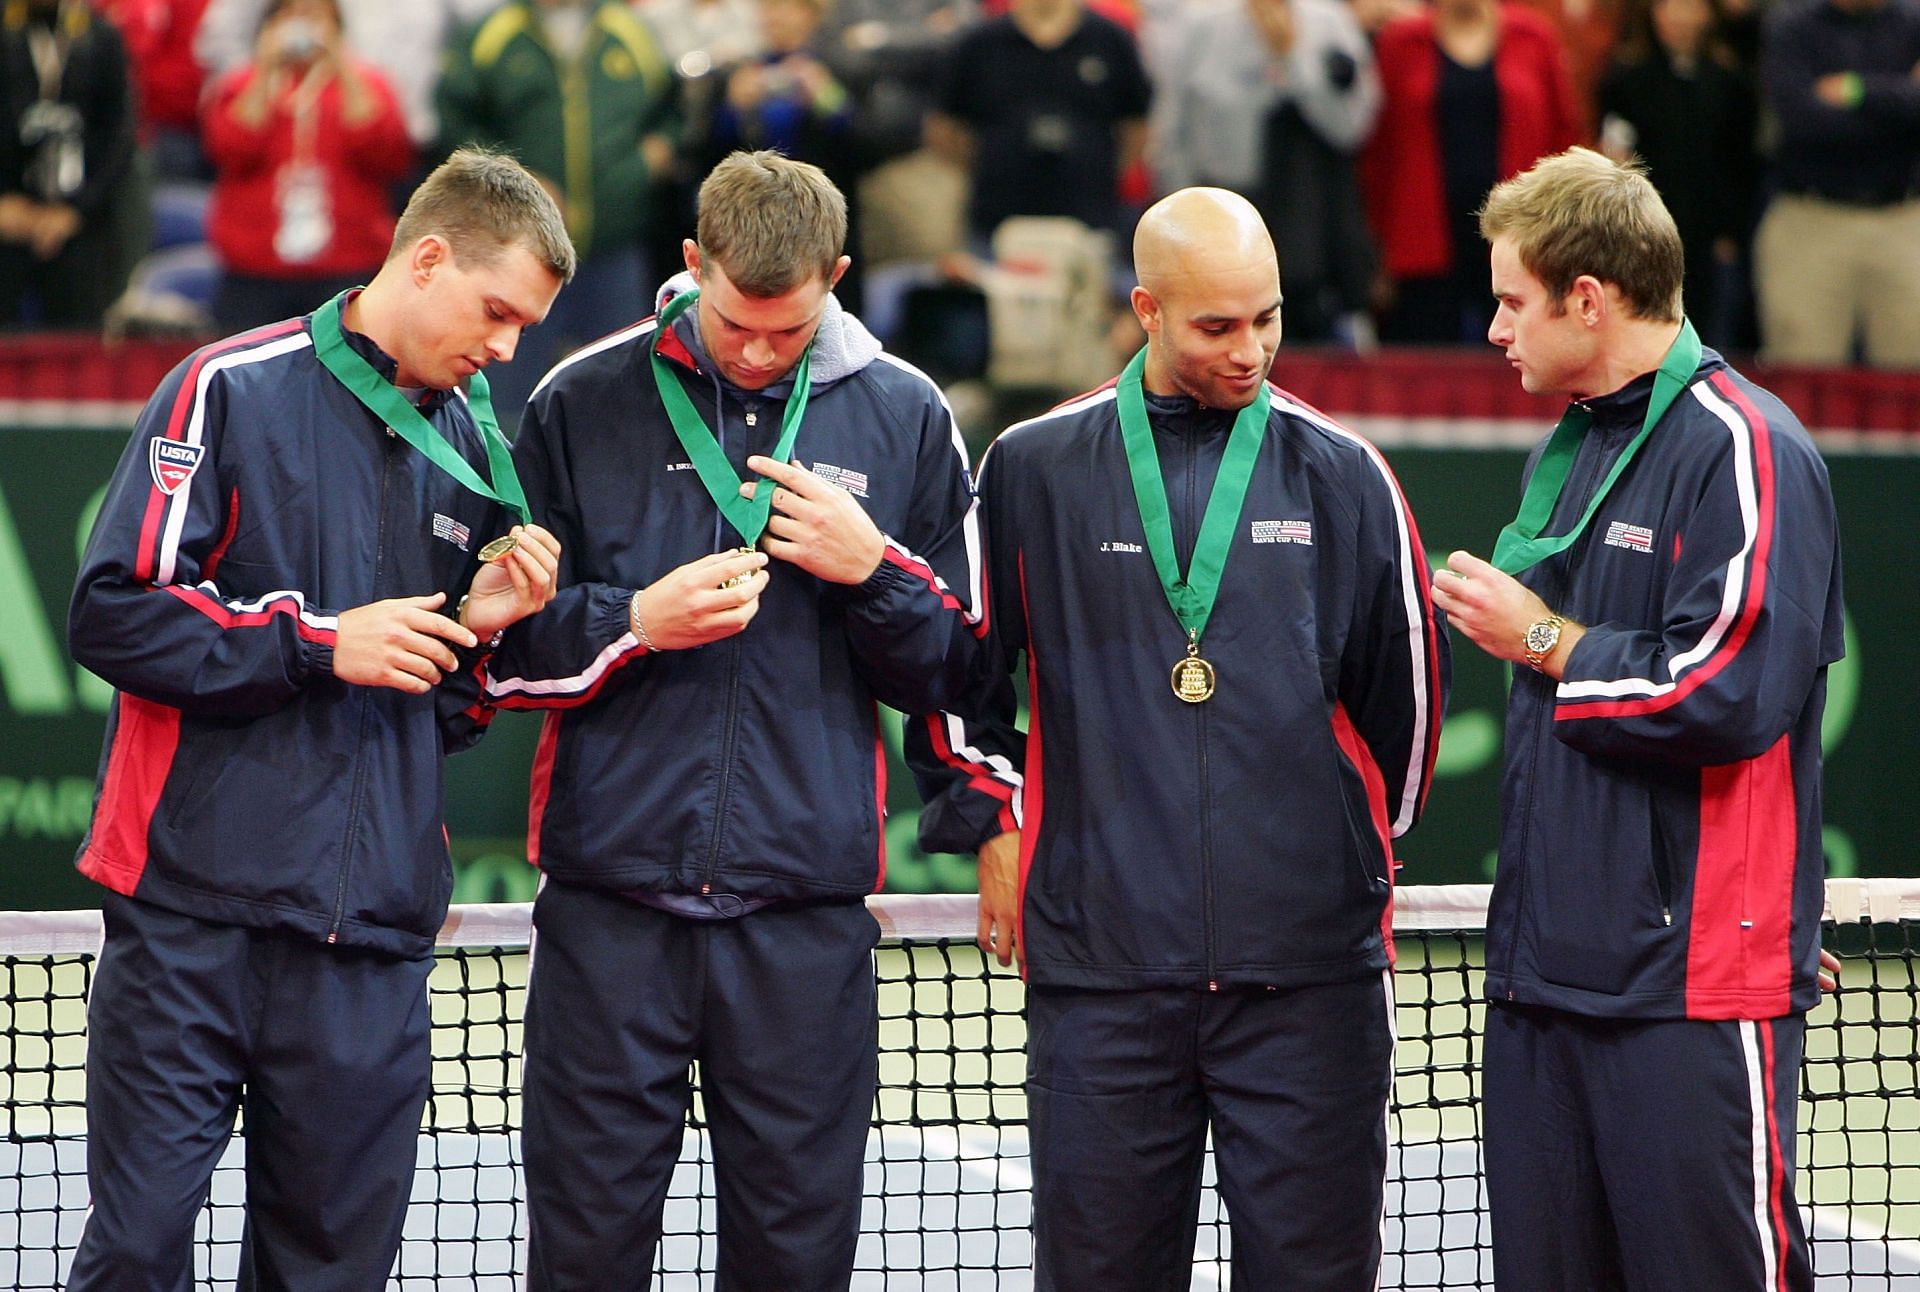 Mike Bryan, Bob Bryan, James Blake, and Andy Roddick (from left to right) after winning the 2007 Davis Cup